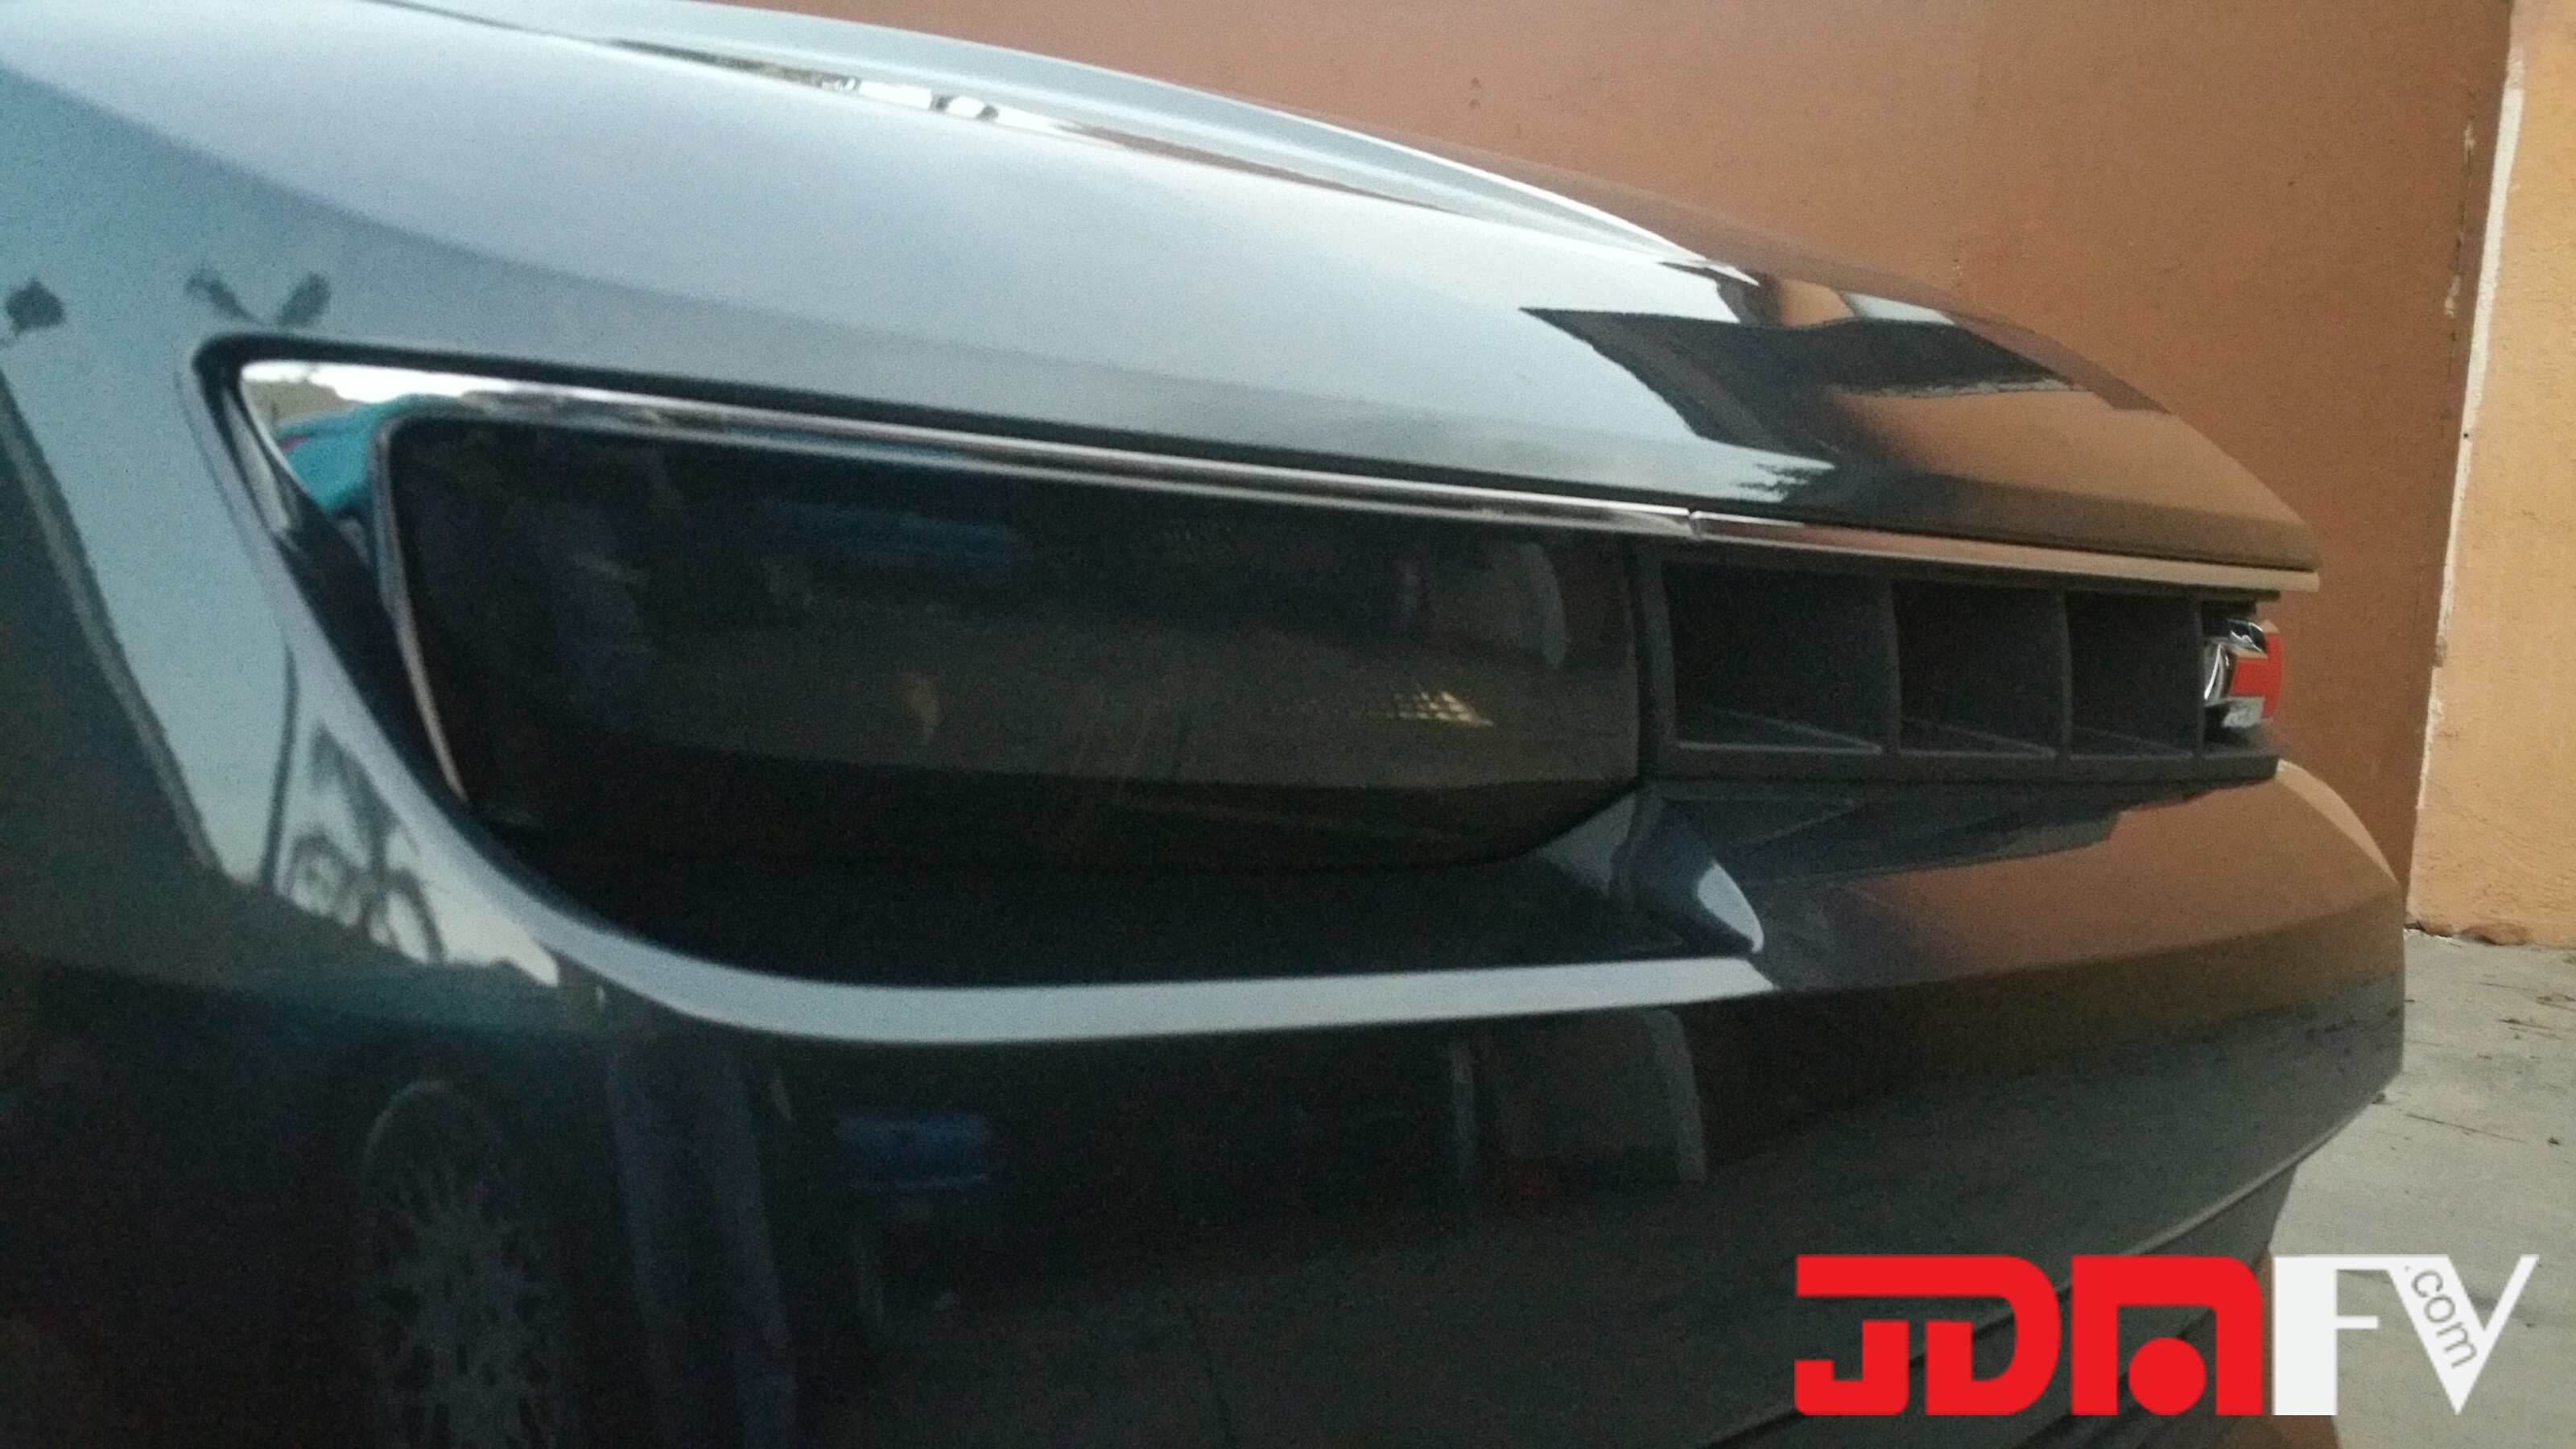 Precut Vinyl Tint Cover with Reverse Cutout for 2014-2015 Chevrolet Camaro RS Taillights 20% Dark Smoke